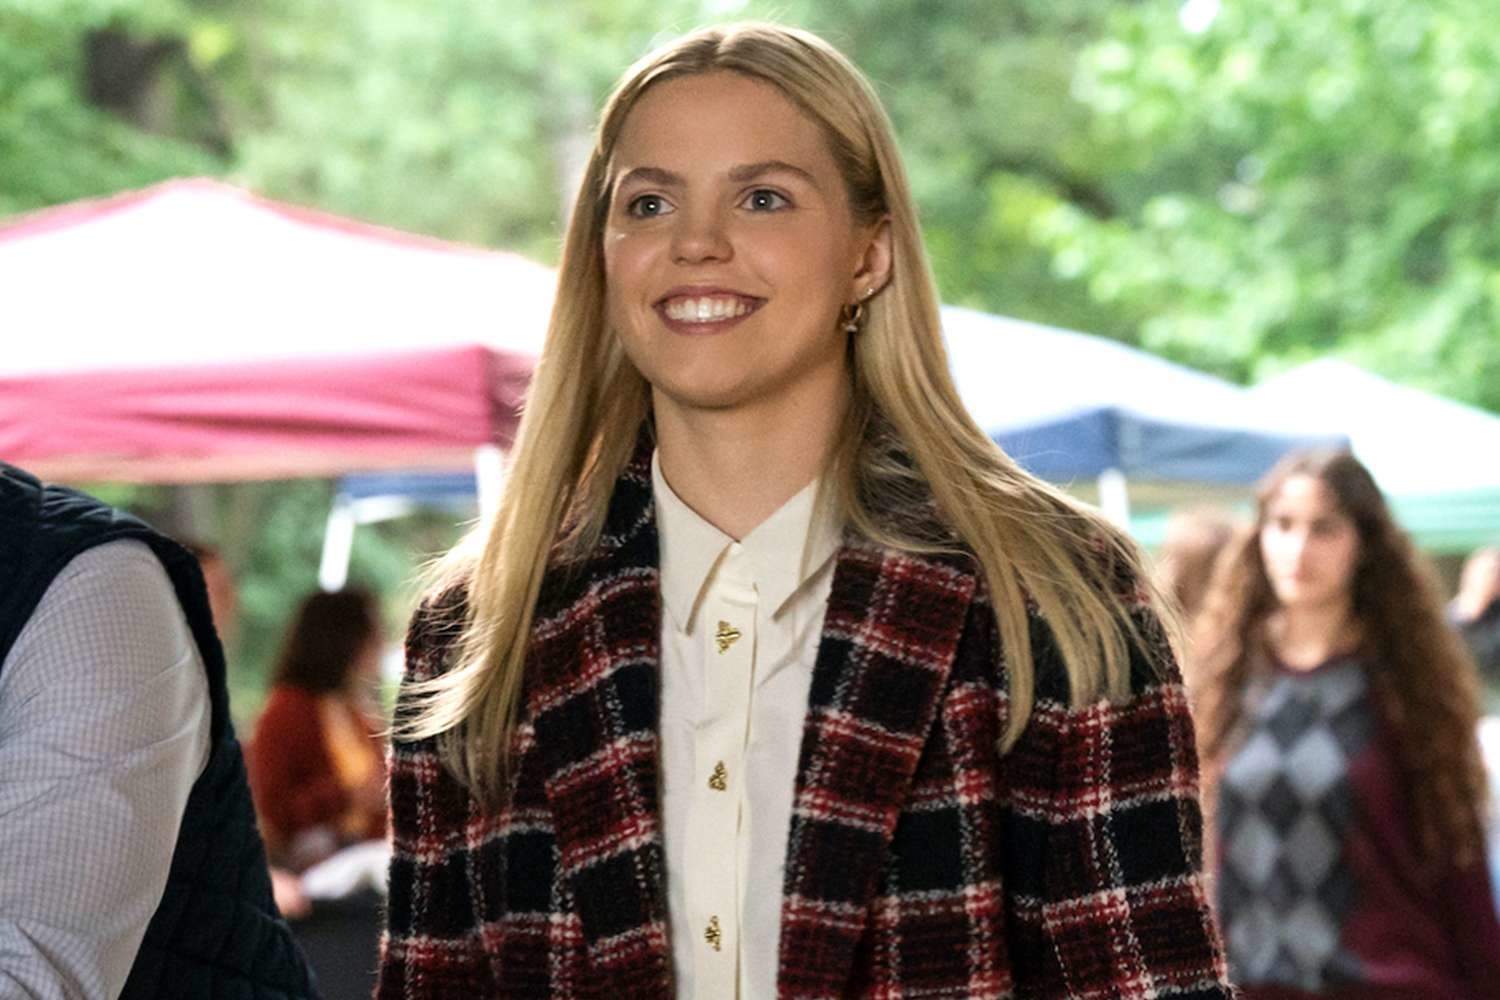 Actress in a scene, wearing a plaid blazer and a smile, with extras in background